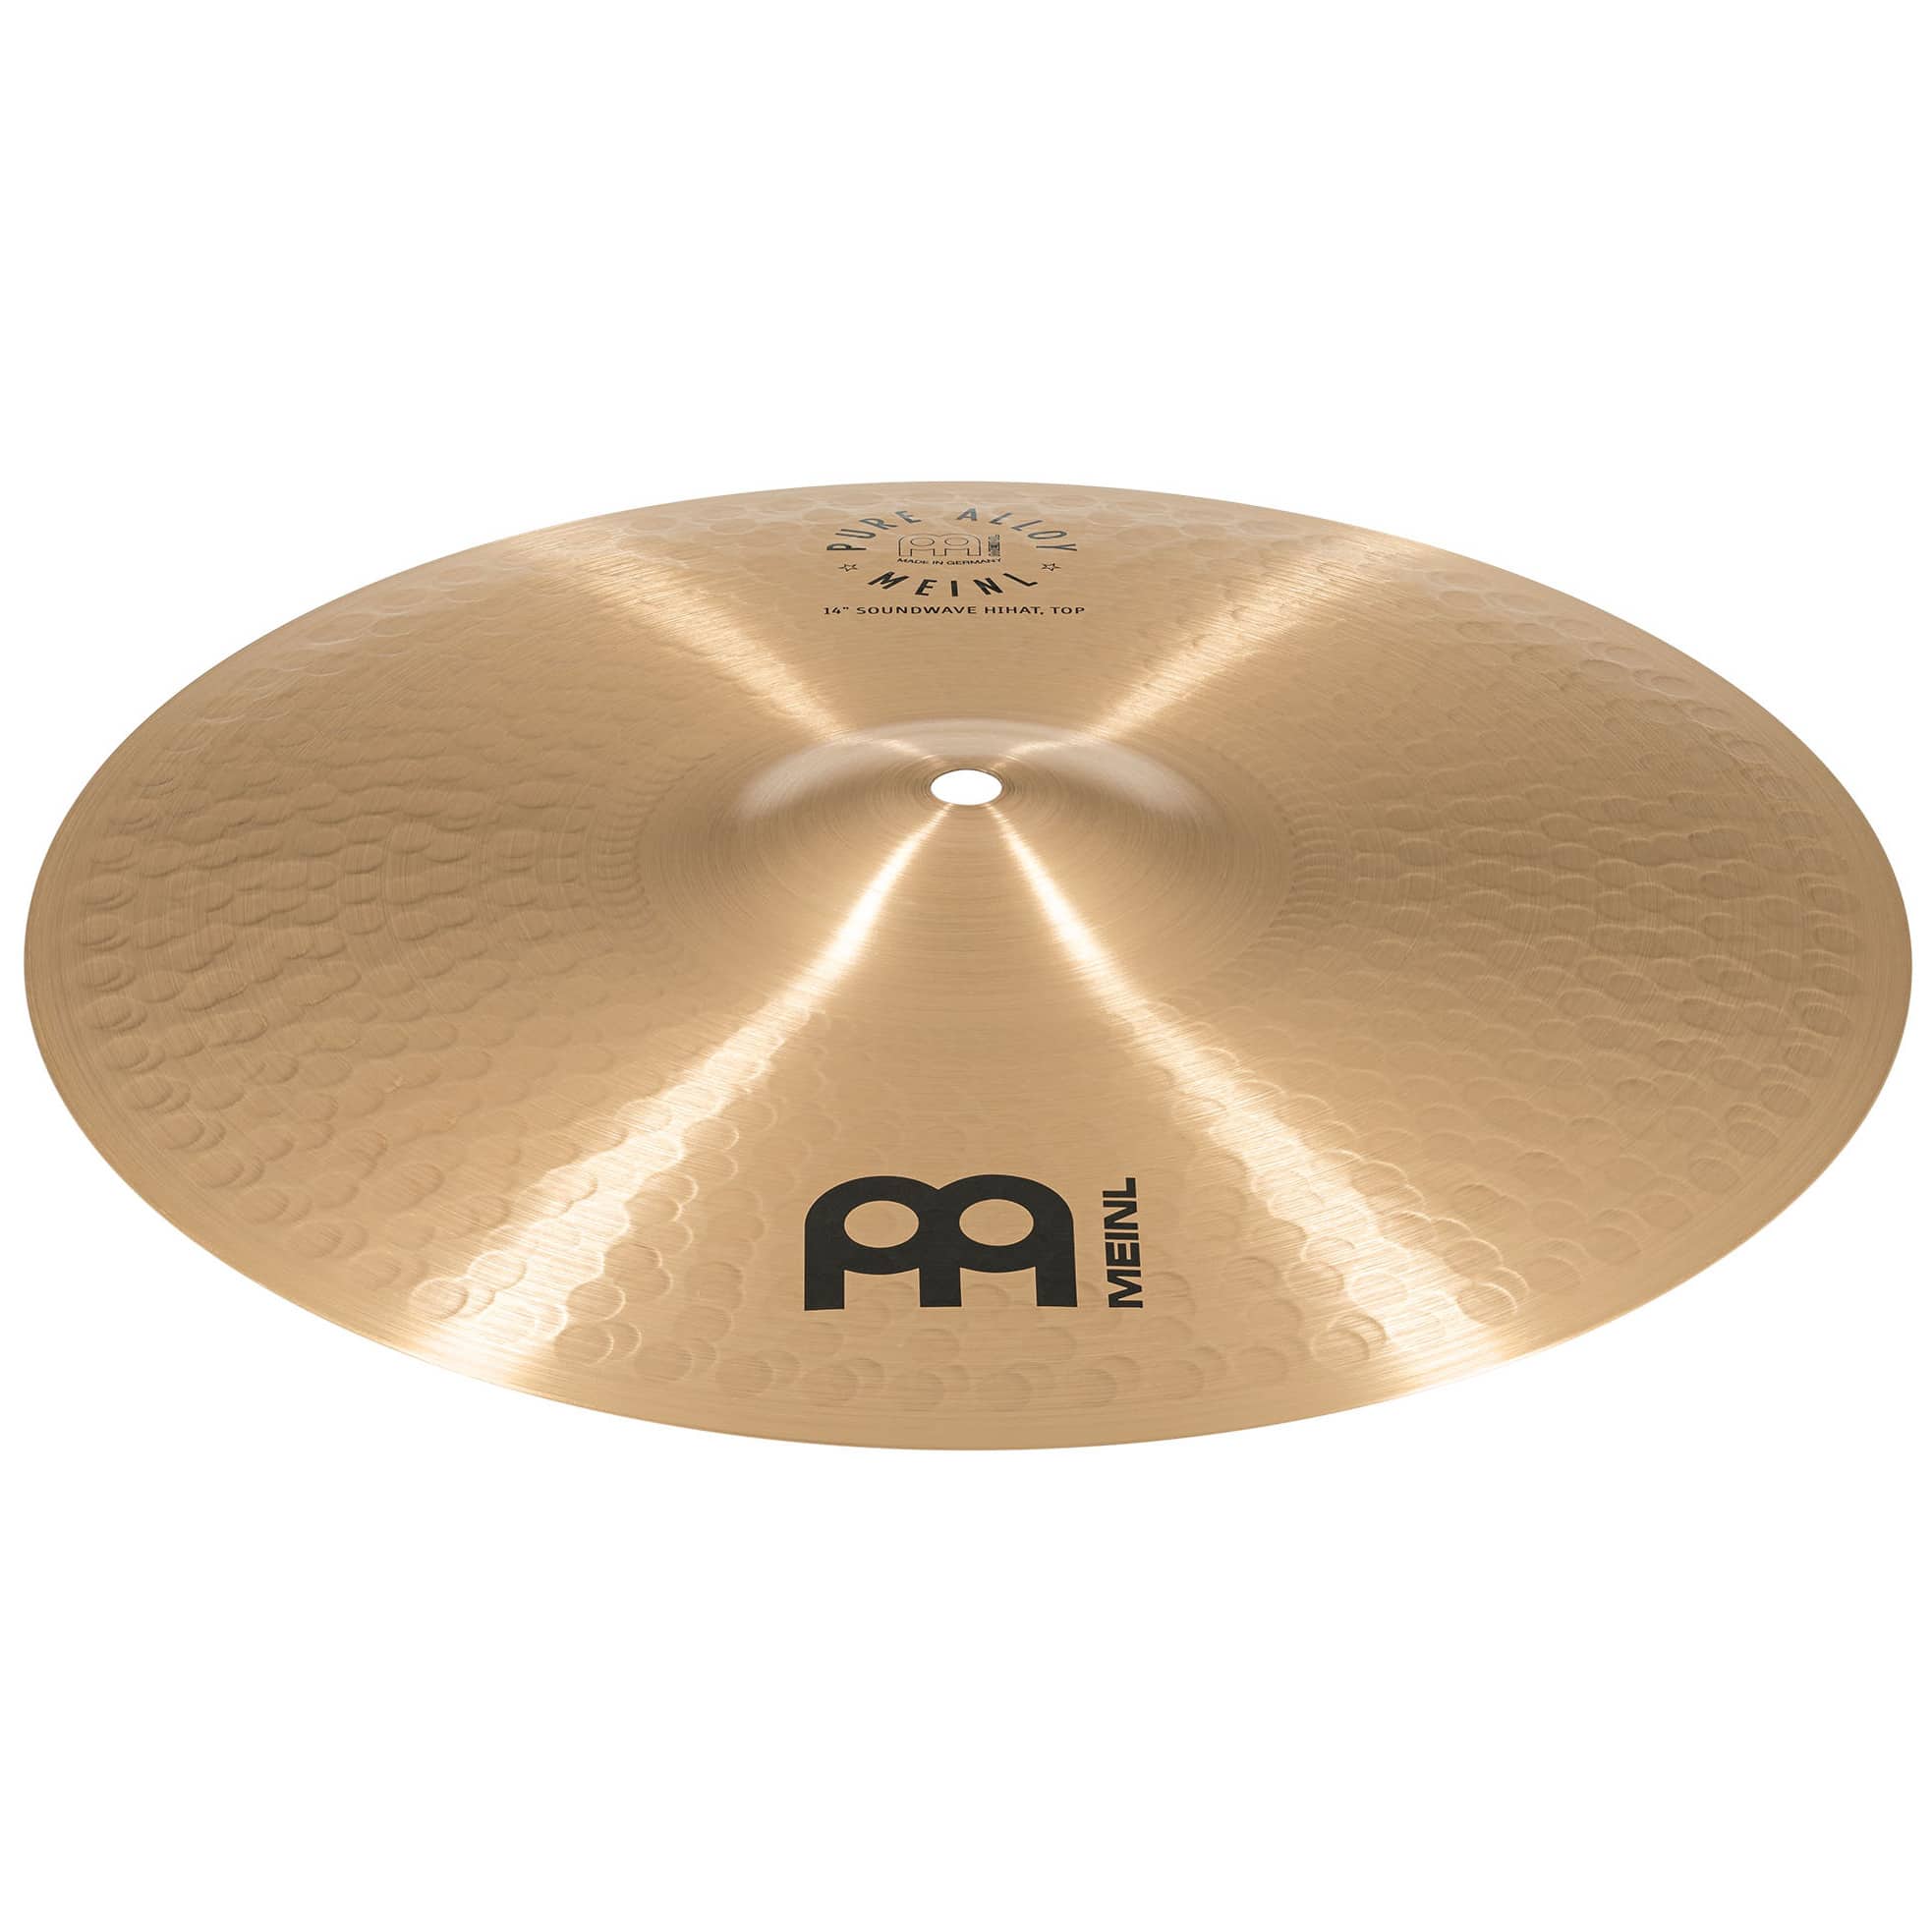 Meinl Cymbals PA14SWH - 14" Pure Alloy Soundwave Hihat 5